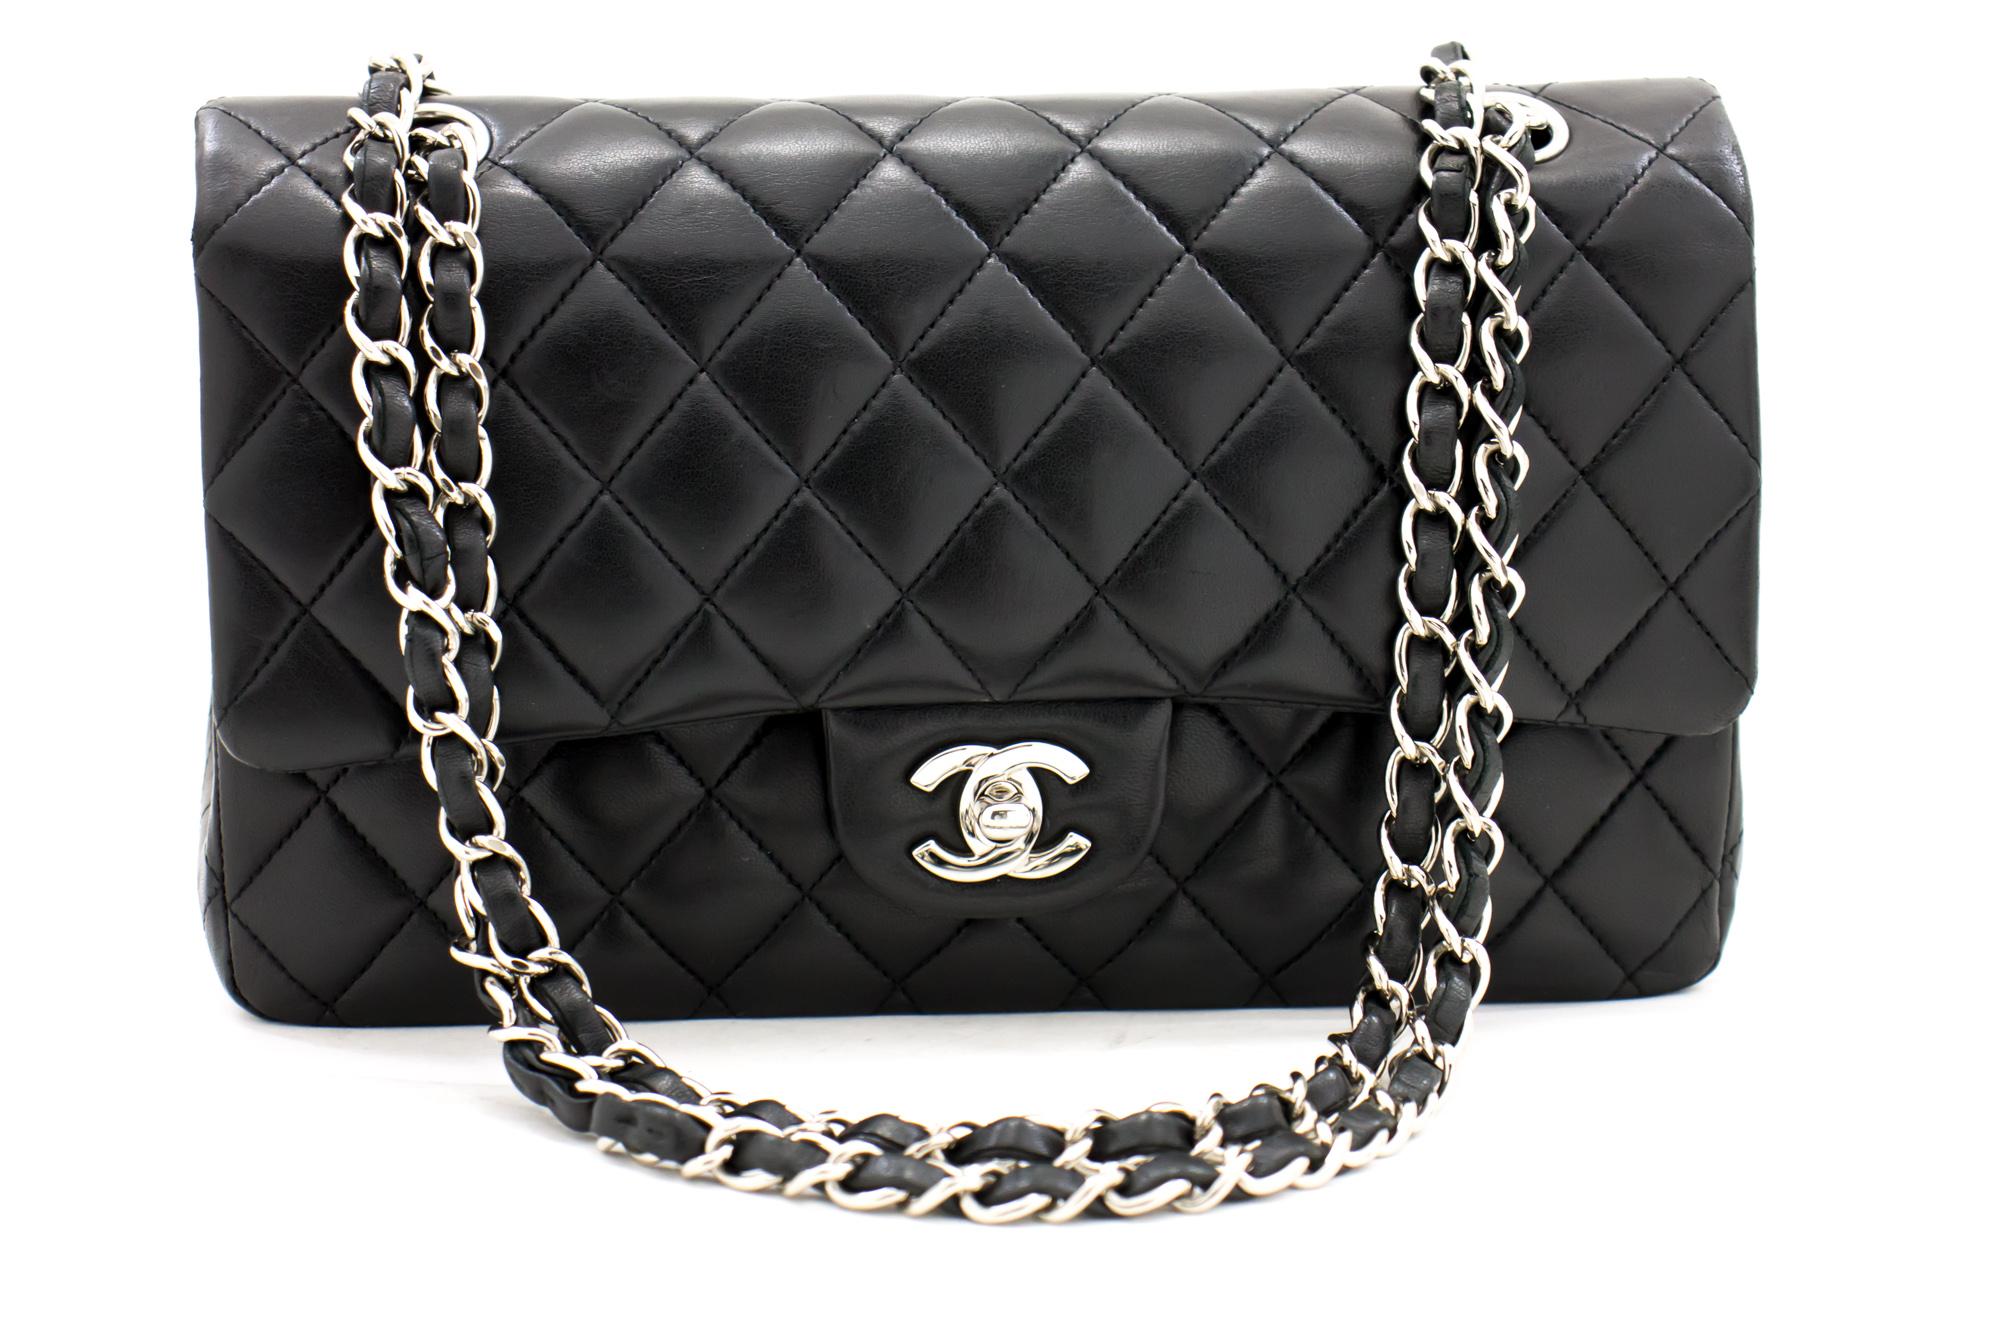 An authentic CHANEL 2.55 Classic Double Flap Medium Silver Chain Shoulder Bag Black. The color is Black. The outside material is Leather. The pattern is Solid. This item is Contemporary. The year of manufacture would be 2009.
Conditions &